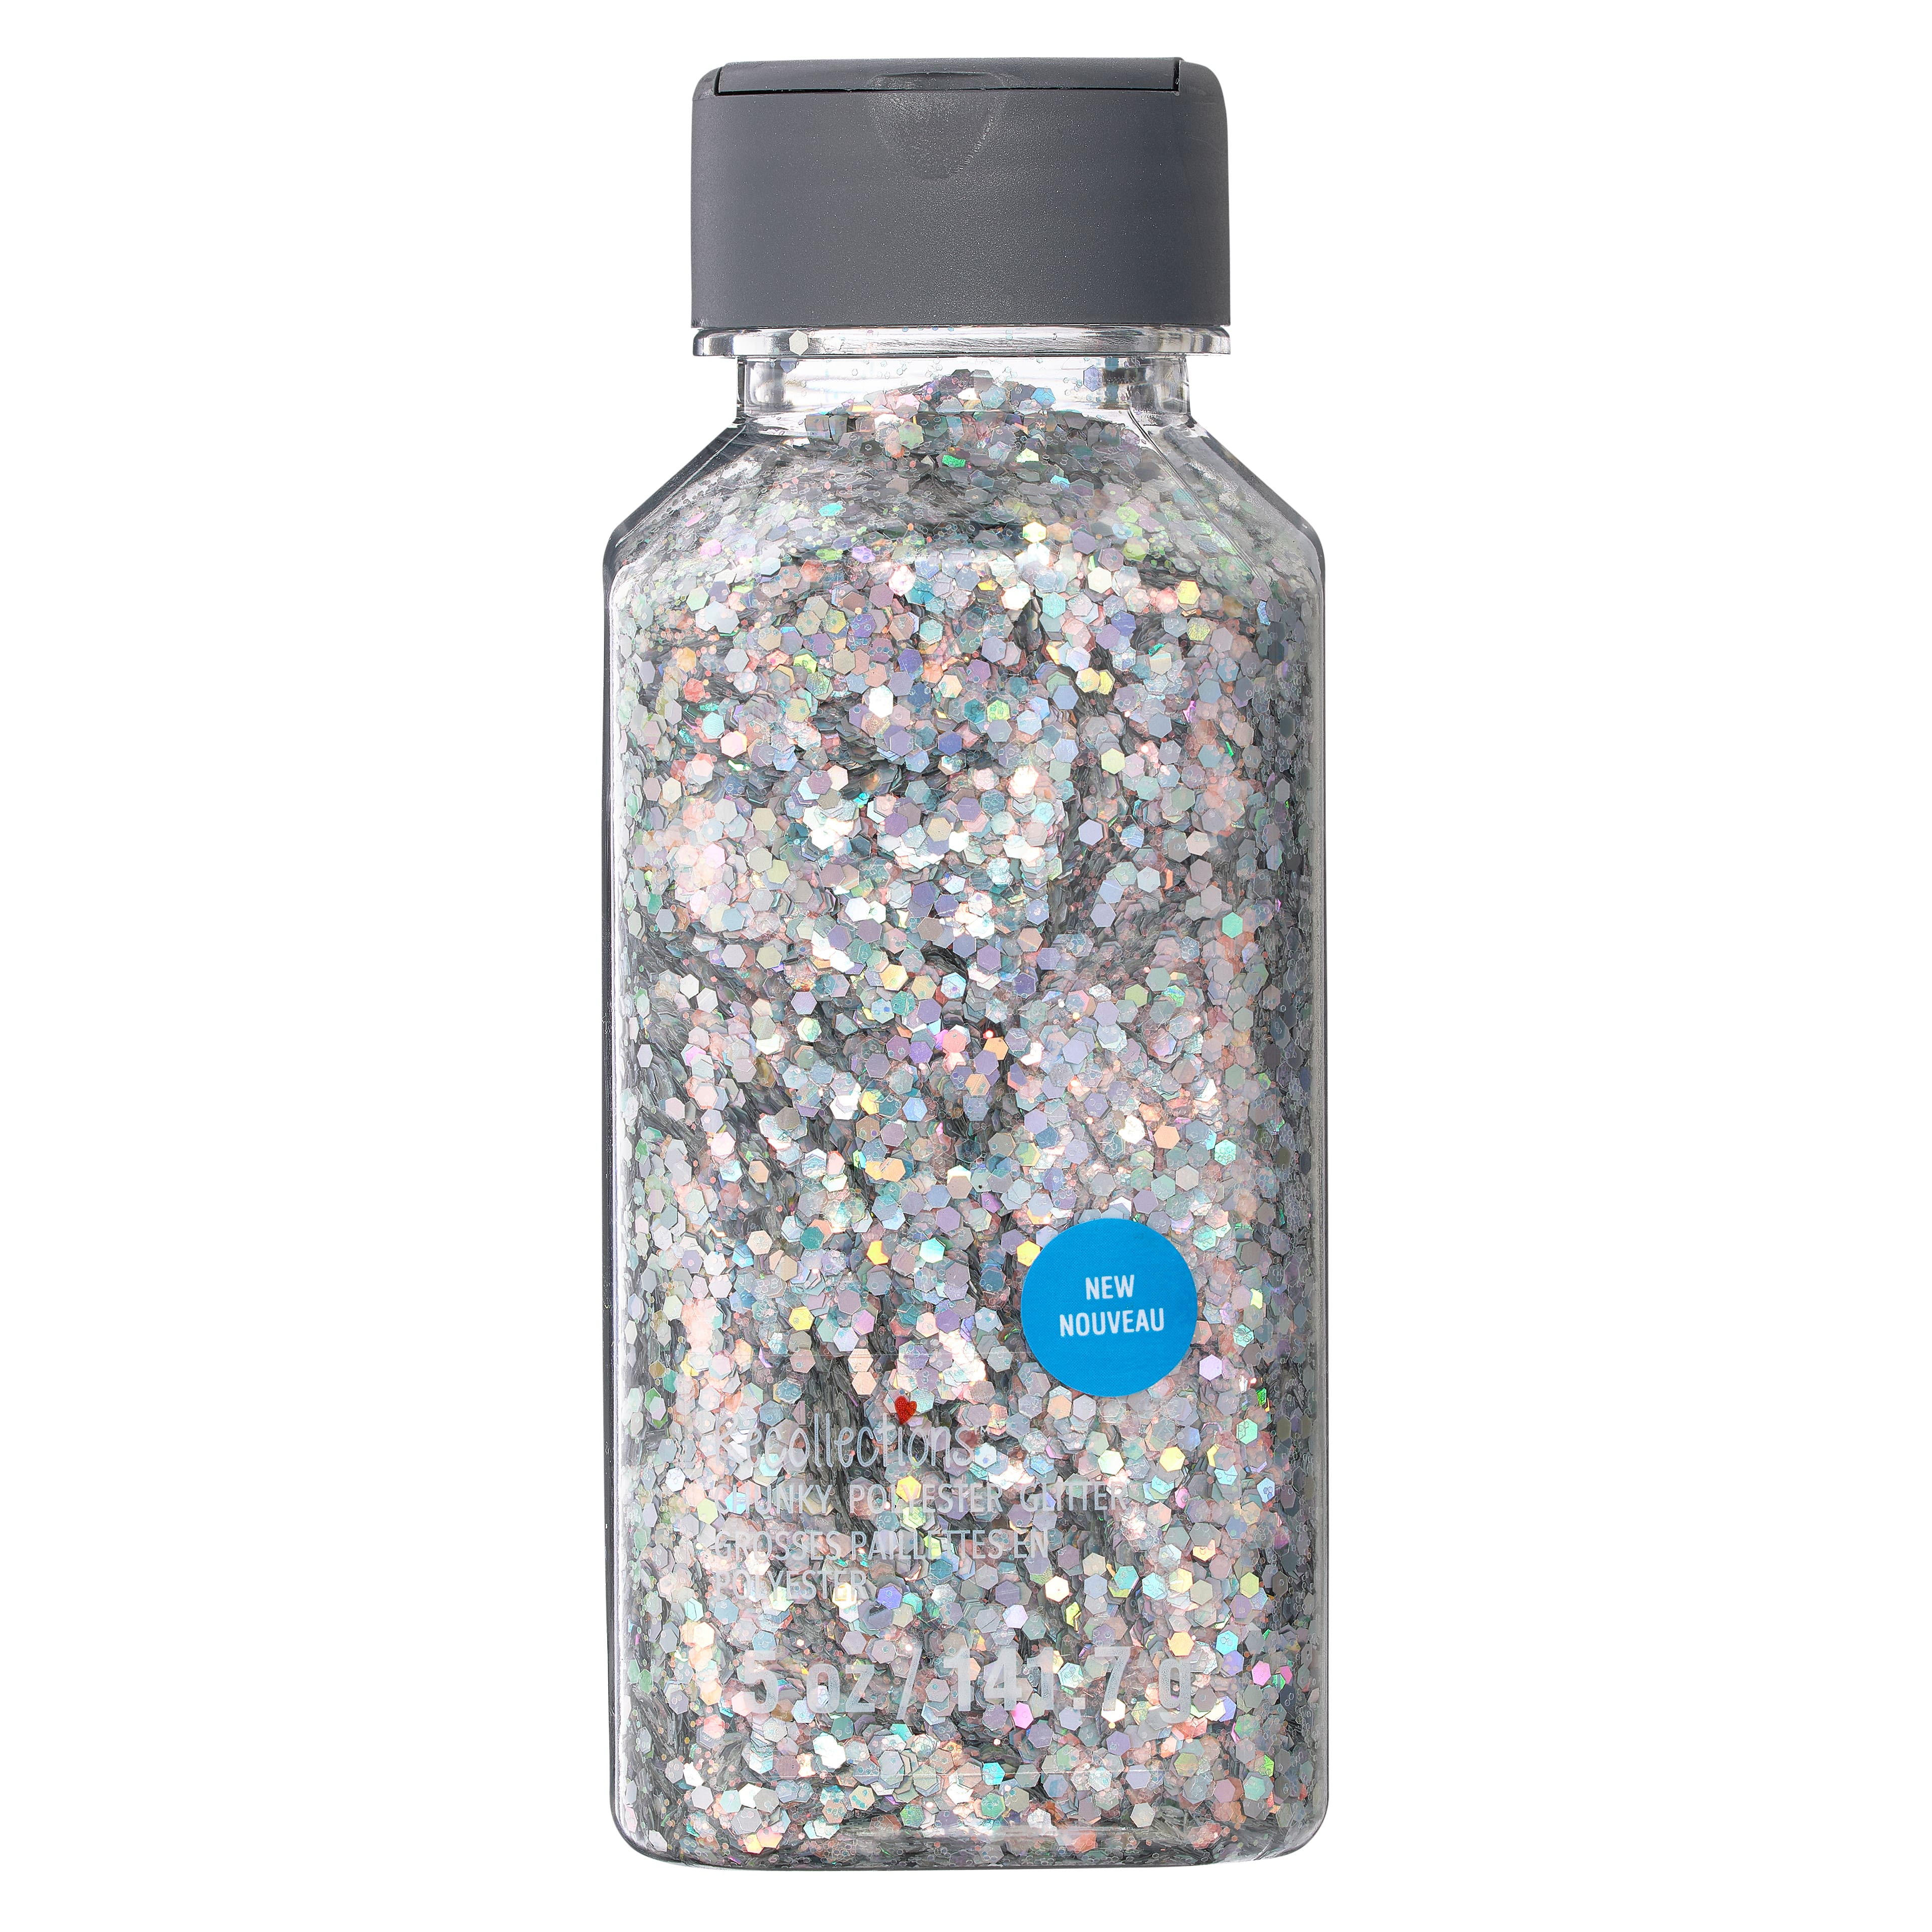 Make Everyday Iridescent with Sublimation Glitter Sparkling